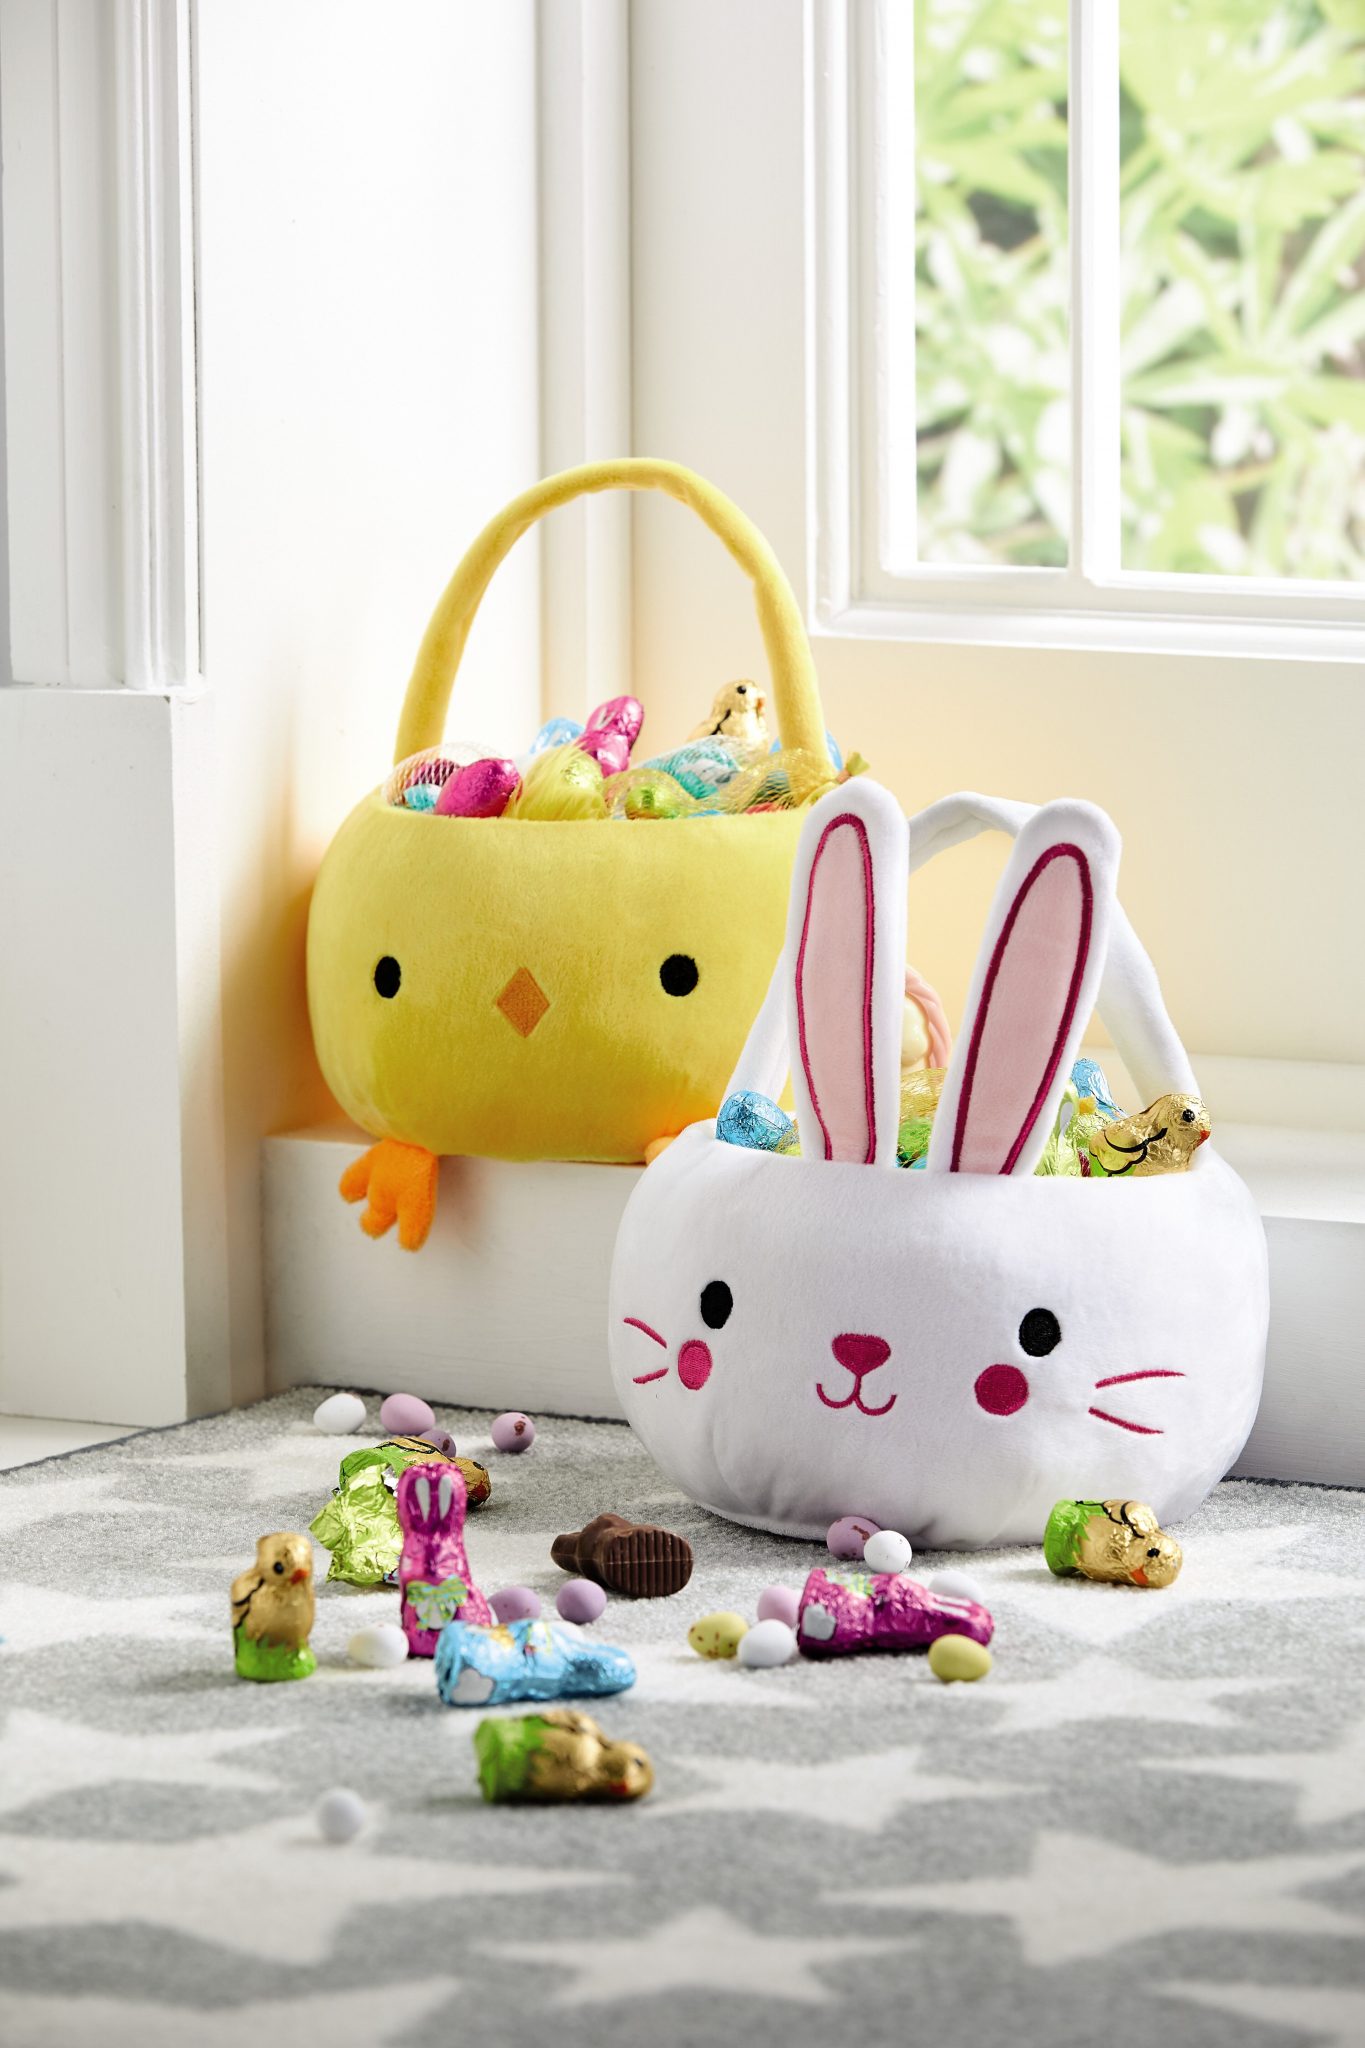 Aldi have everything you need to pull off the best egg hunt including giant baskets